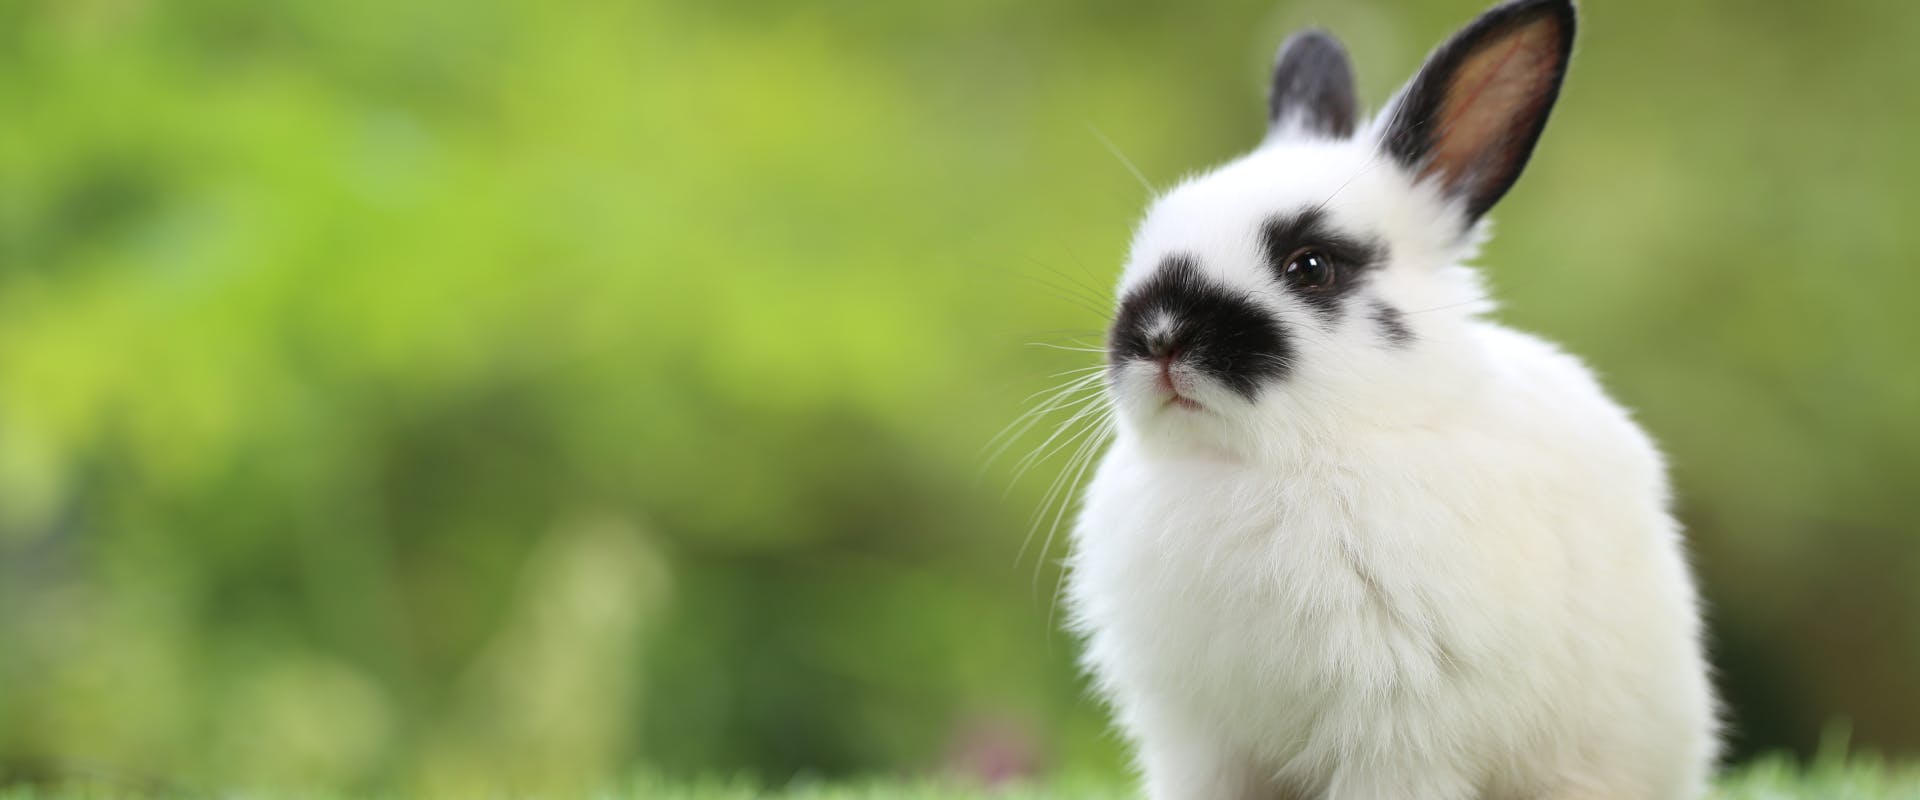 a baby white and black bunny sitting on the lawn of a garden